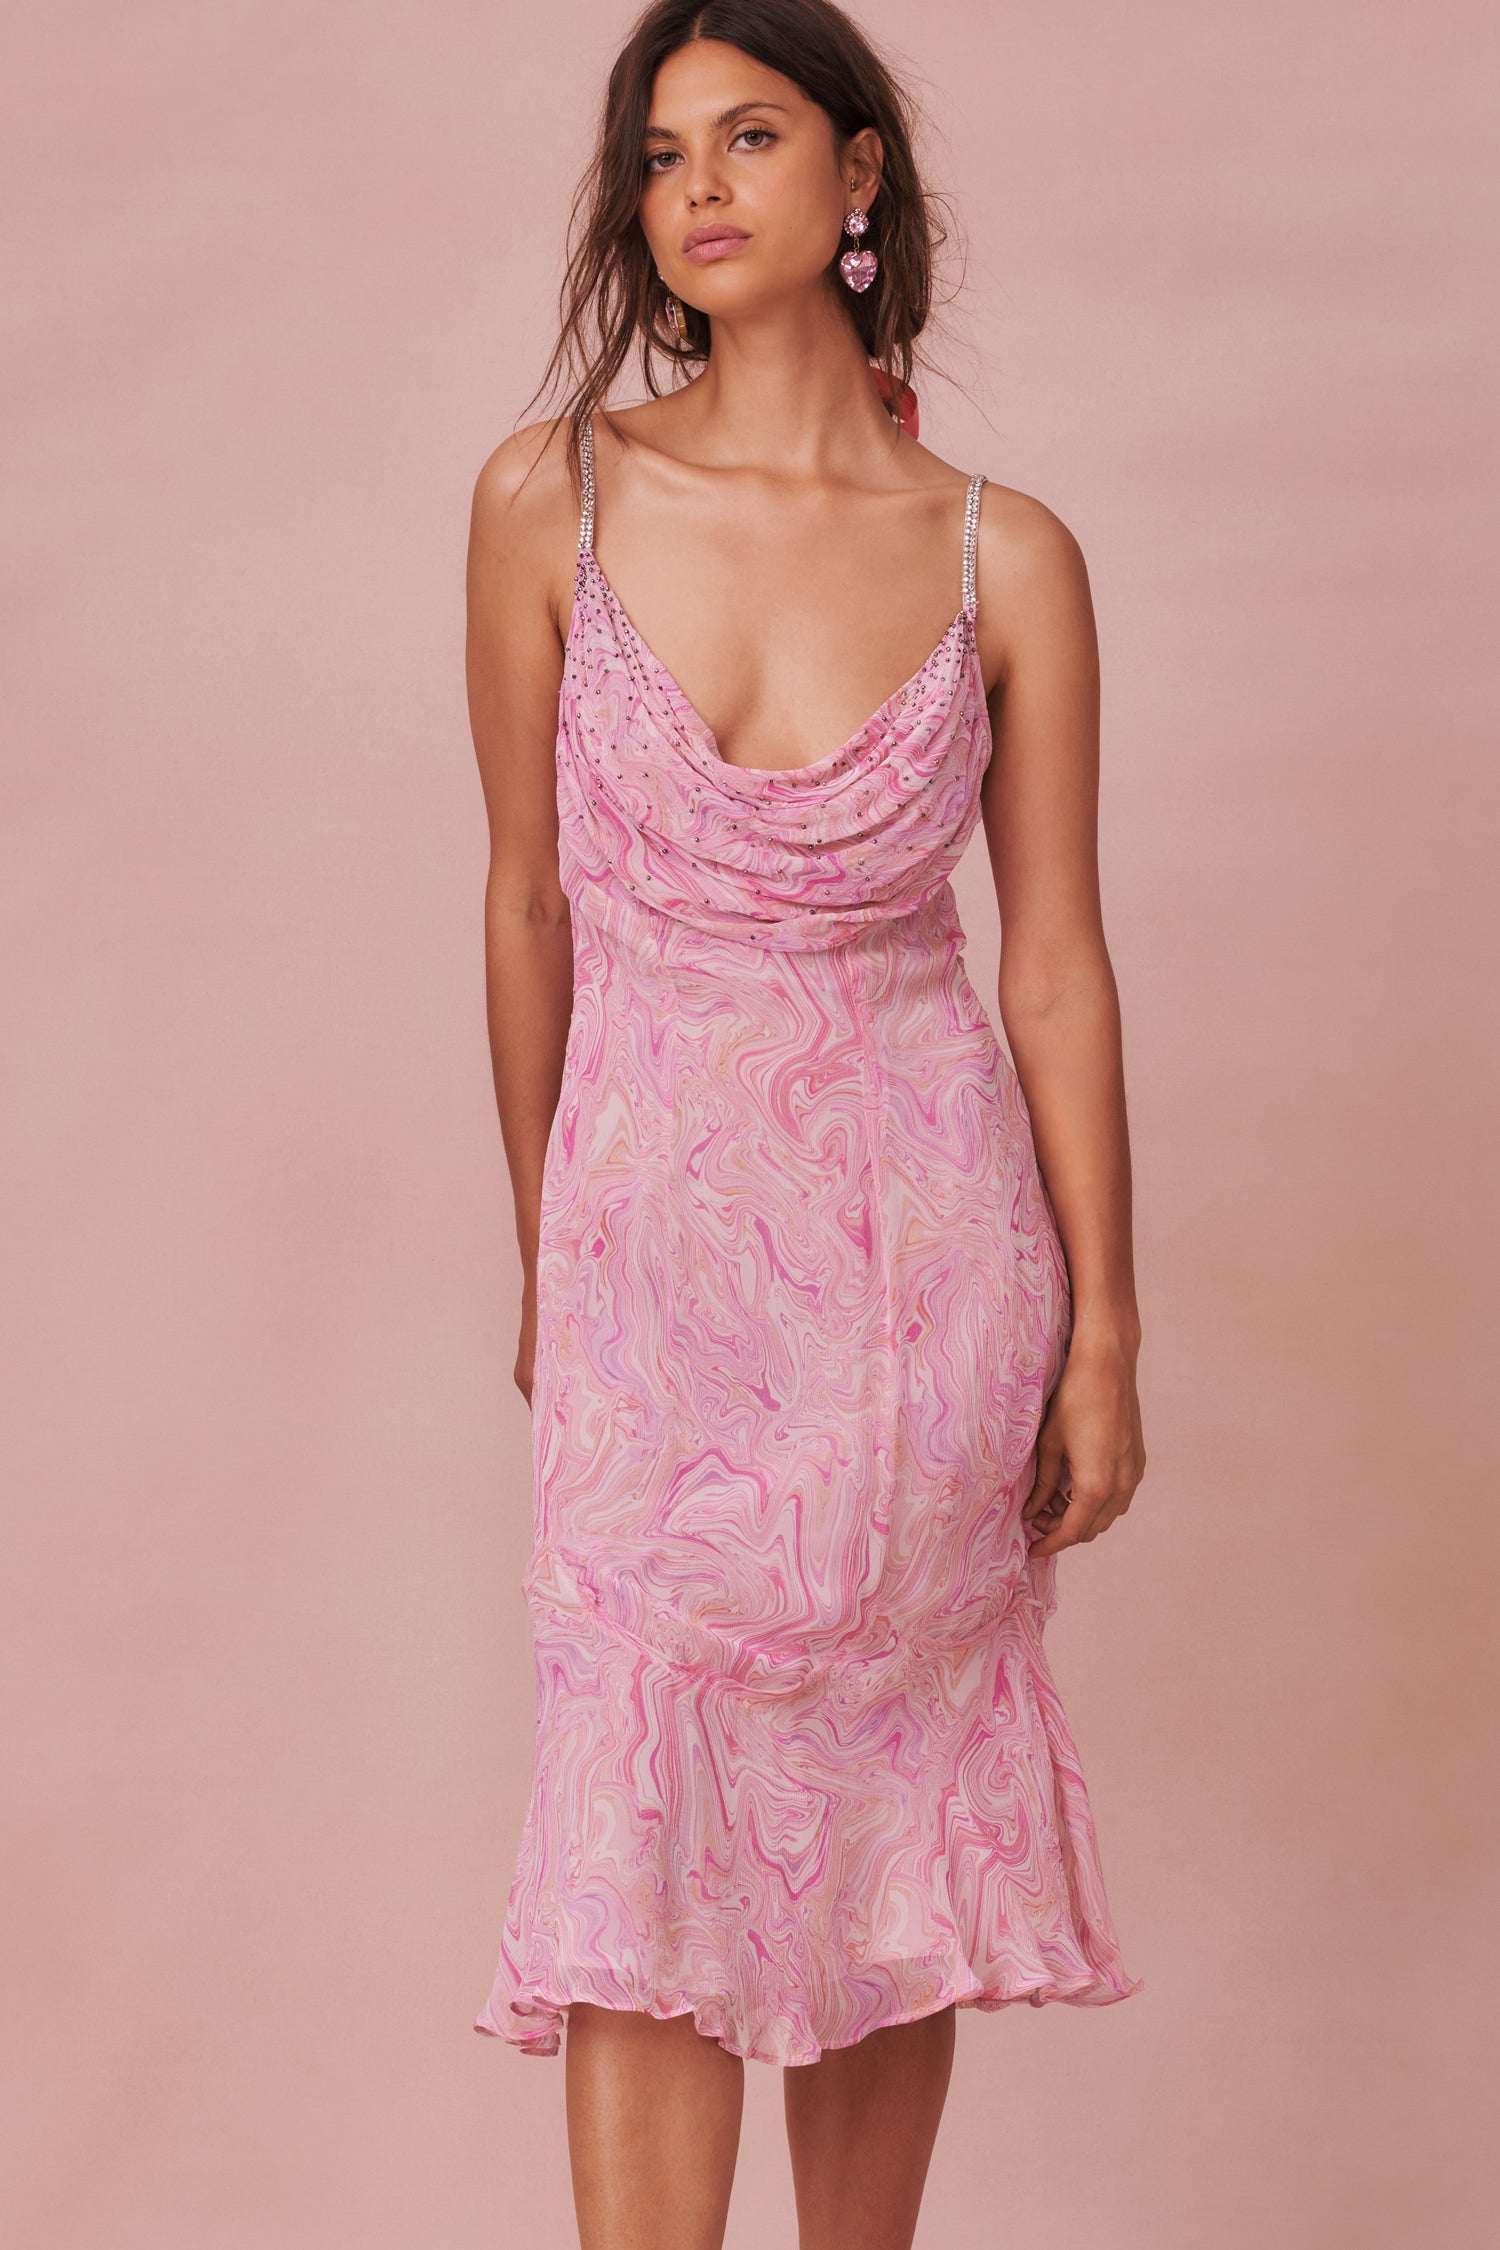 Pink maxi dress with a vibrant print on a luxe velvet fabric. A classic slip dress with a cow neck and drape. The neckline has a spray of crystals, the straps are beaded and the skirt has a flirty sweep.